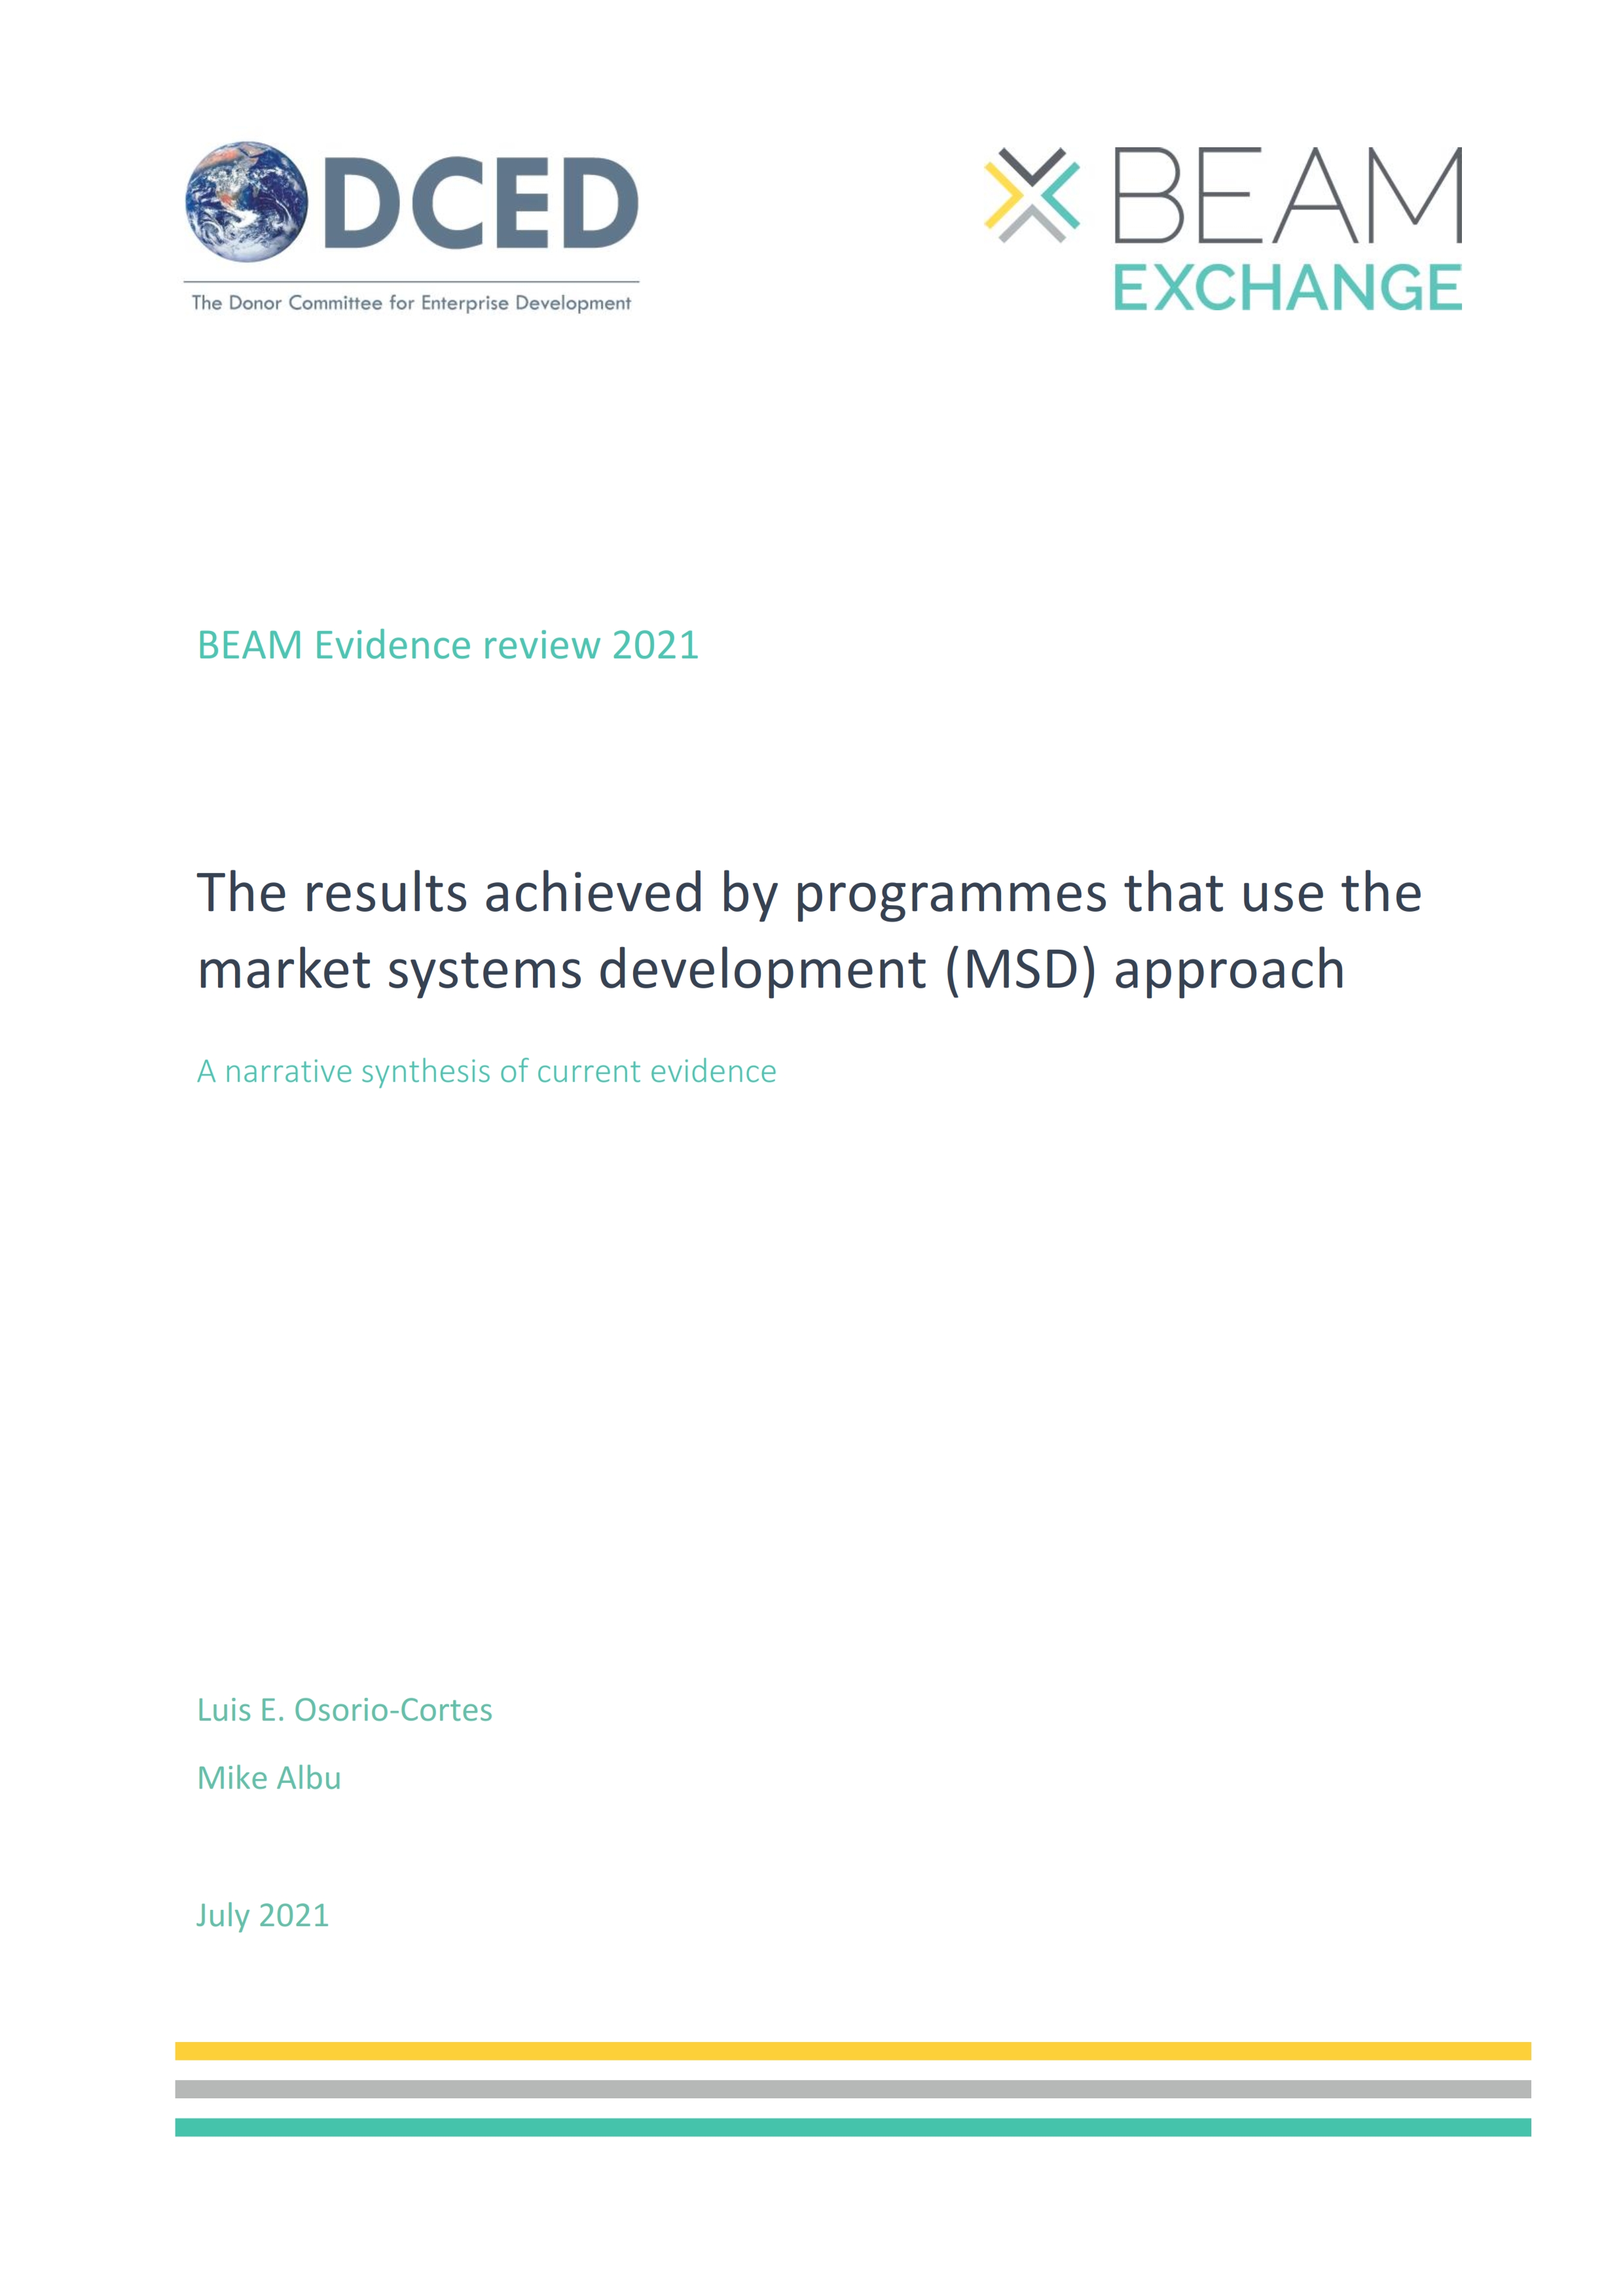 BEAM Evidence review 2021